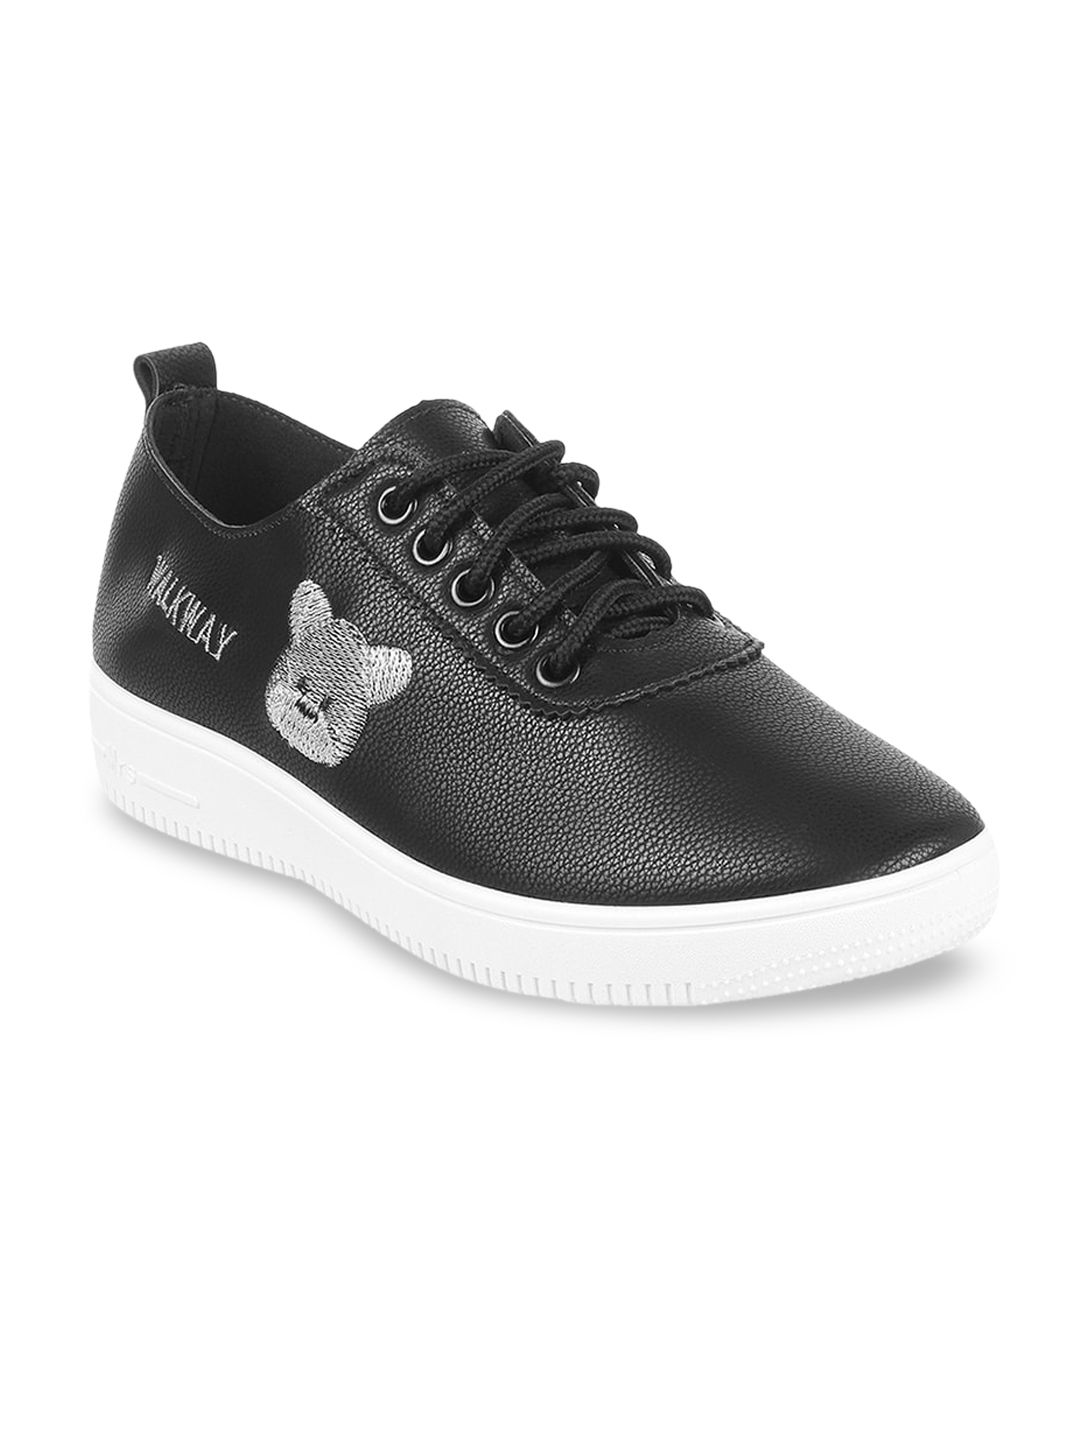 WALKWAY by Metro Women Black Textured Synthetic Sneakers Price in India